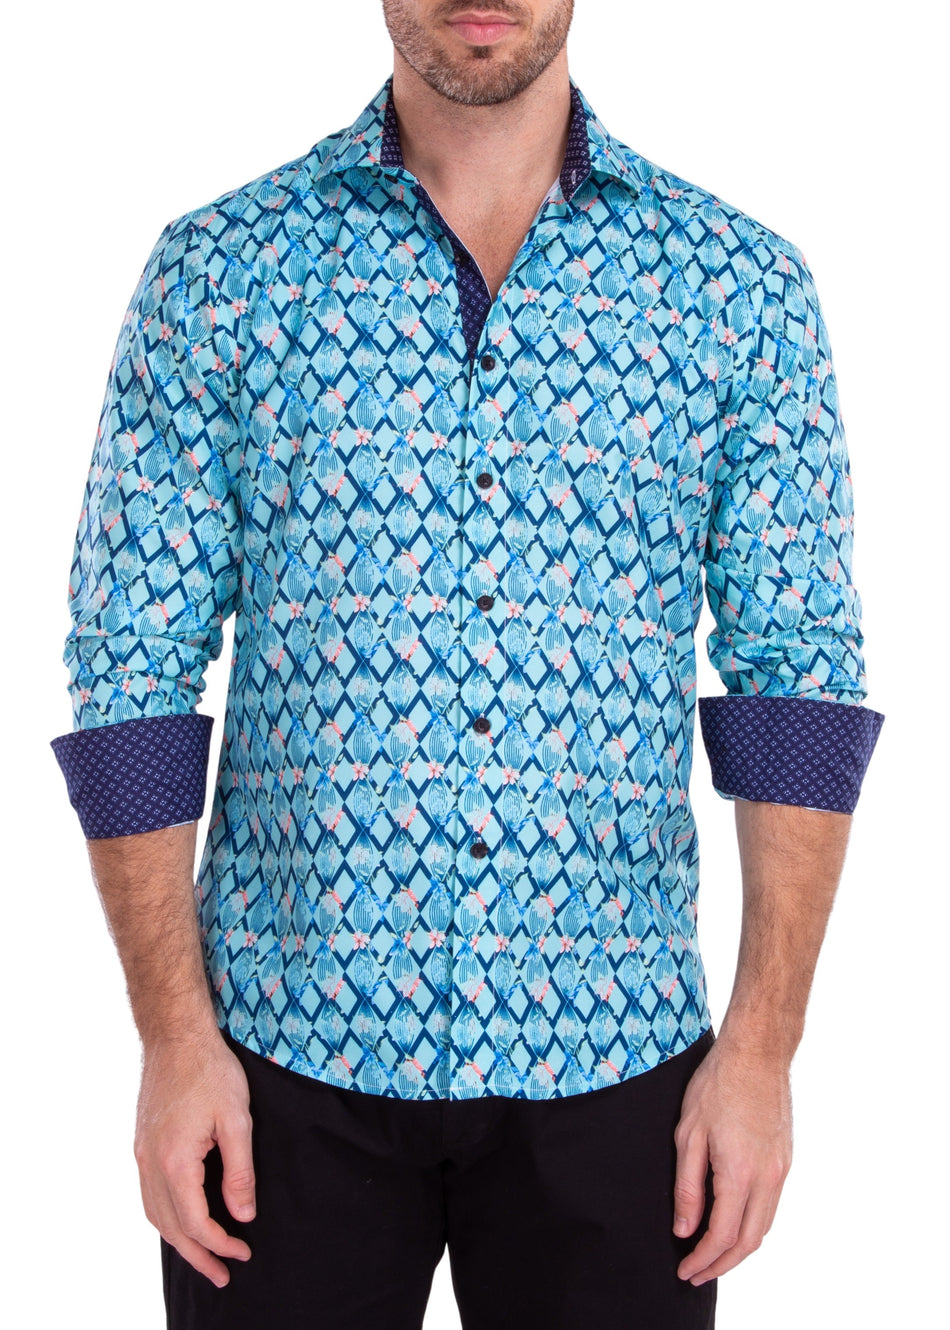 212206 - Turquoise Button Up Long Sleeve Dress Shirt